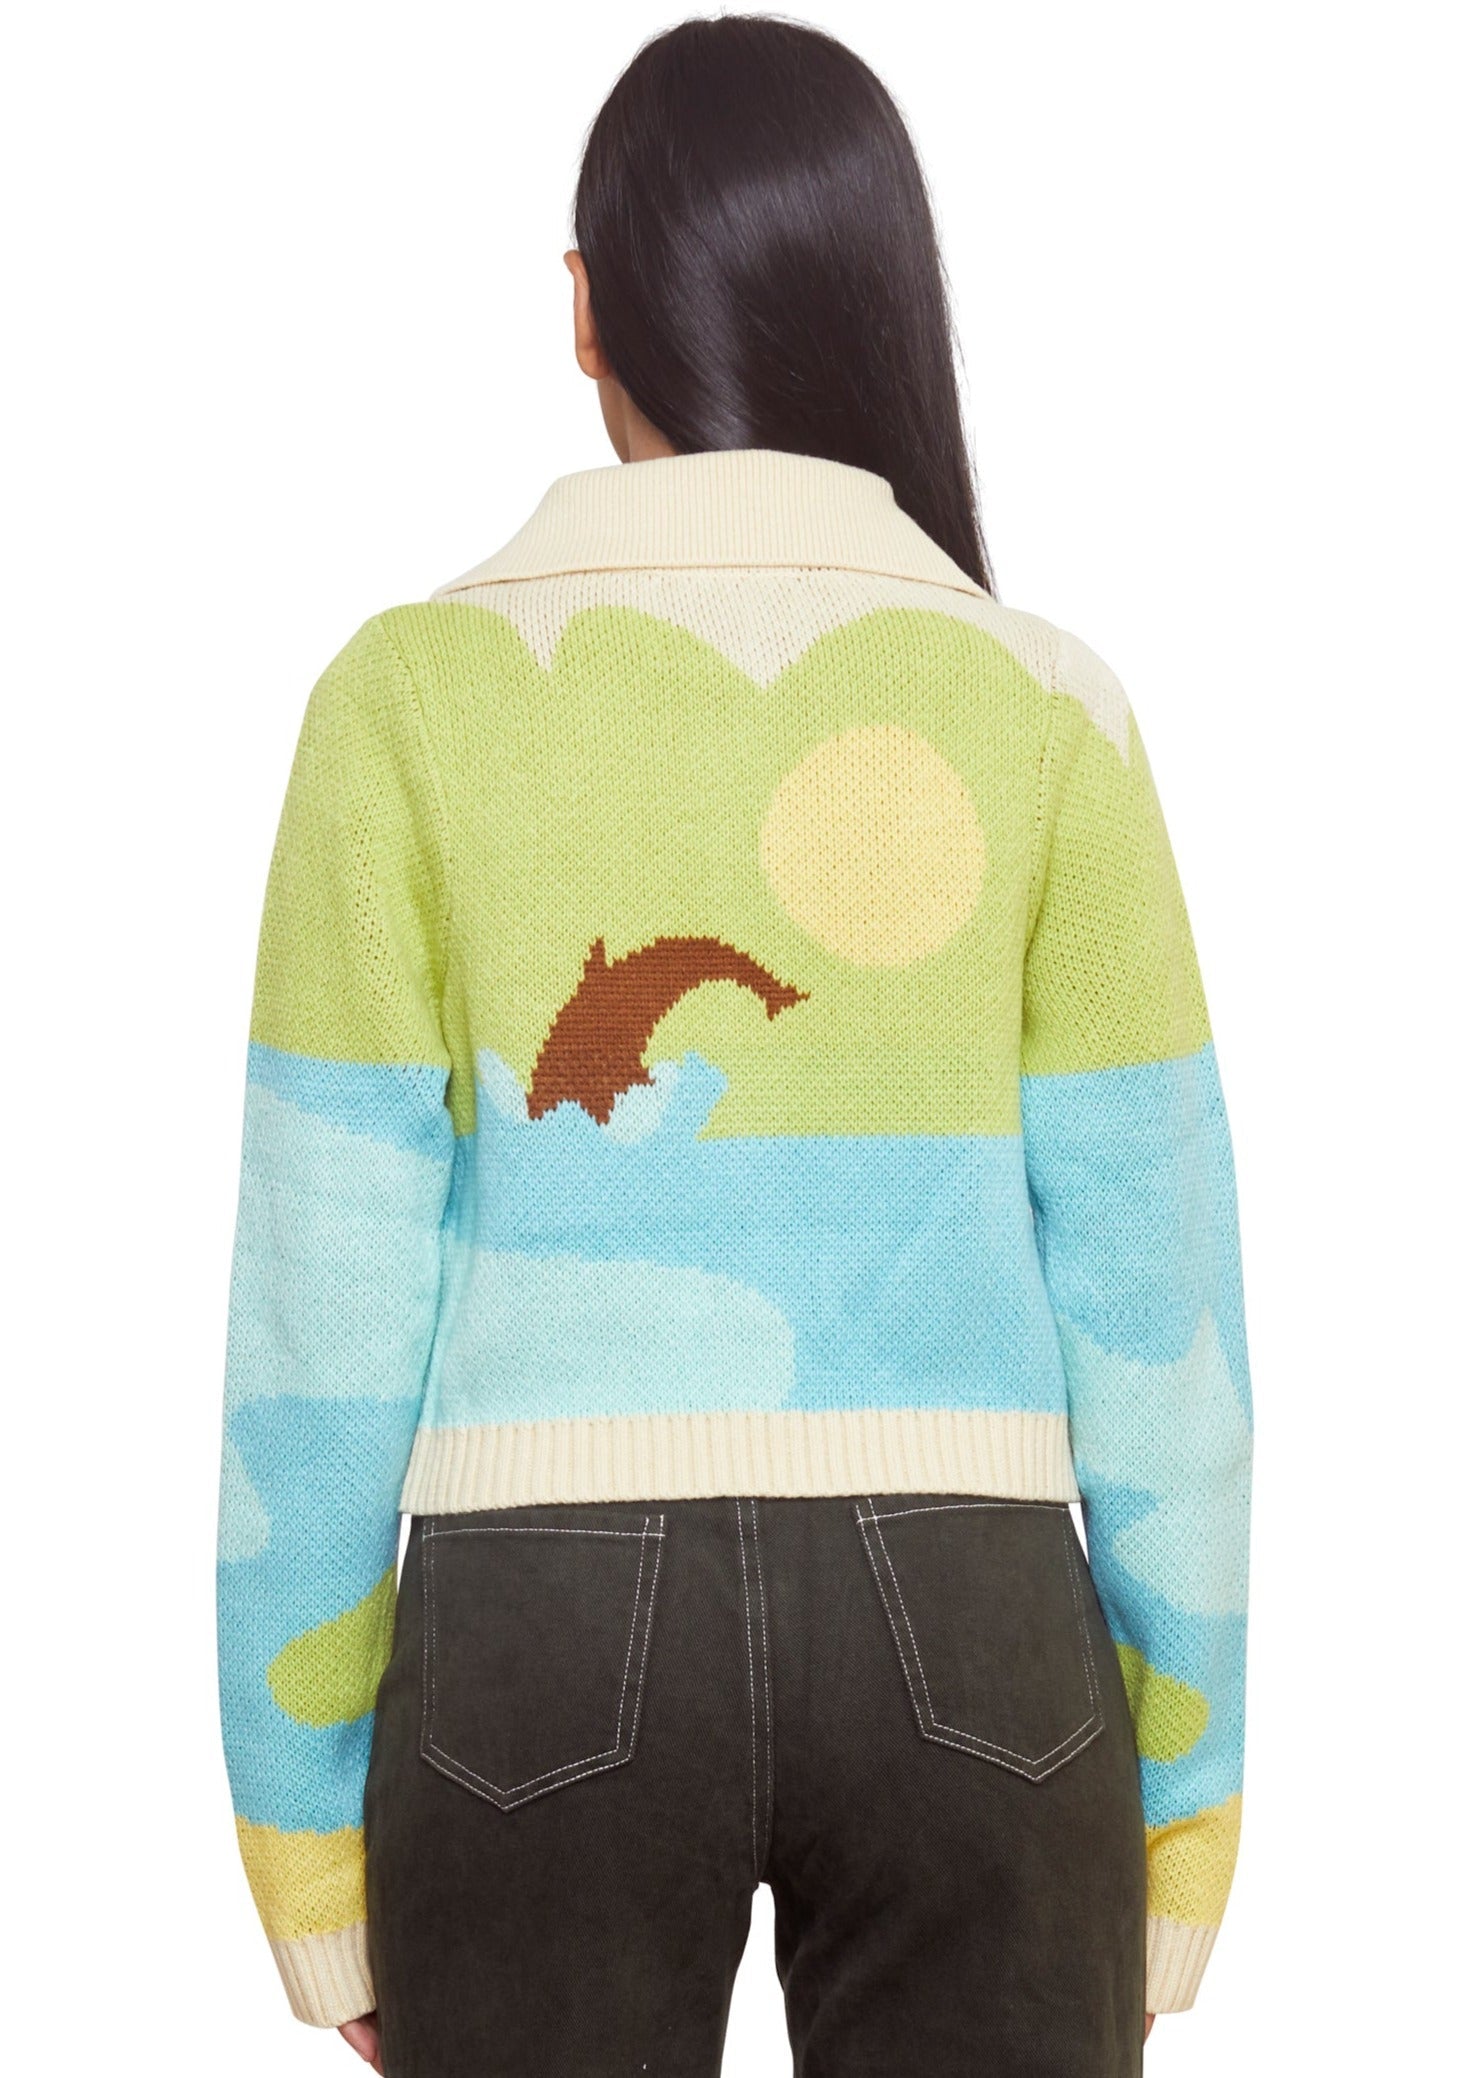 Green and blue Classic hofs jacquard cardi shape with dolphin design from the brand House Of Sunny